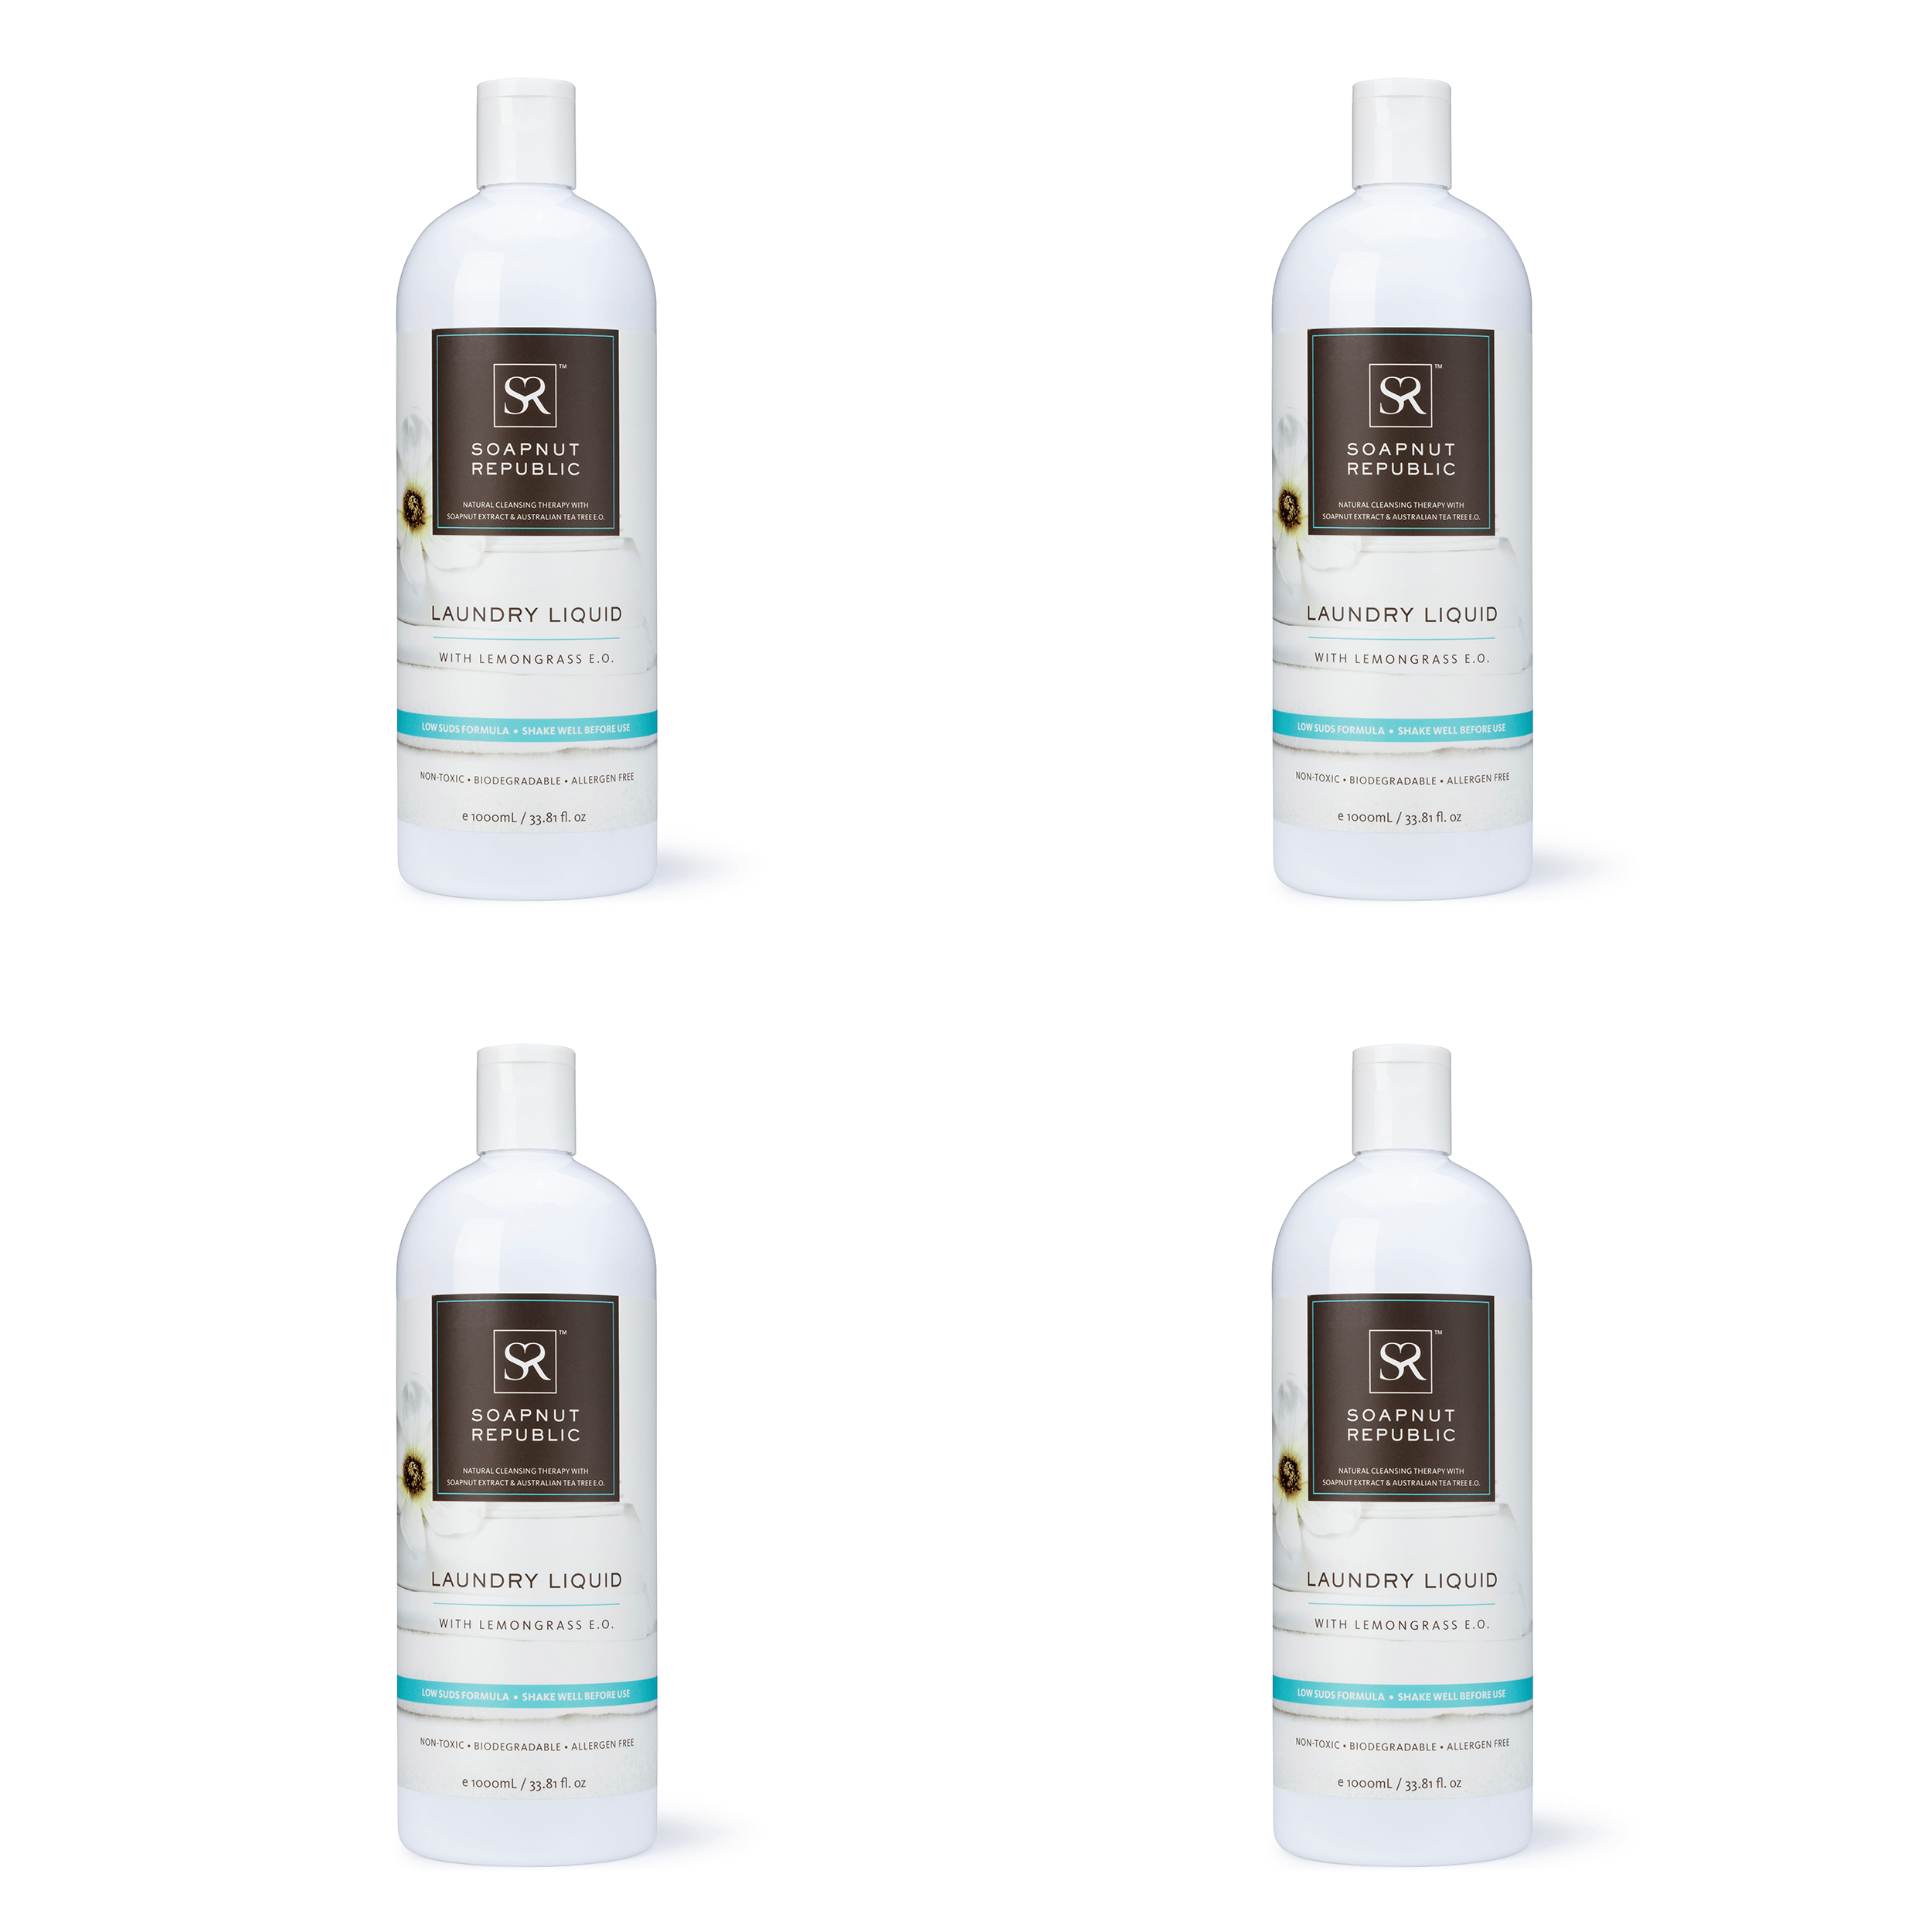 Soapnut Republic natural laundry liquid is highly concentrated, antibacteria, non-toxic formula is completely natural is perfect for sensitive skin and safe for newborns and baby. Our natural cleaning detergent are concentrated enough to clean effectively and remove the toughest stains, yet gentle on all fabrics.